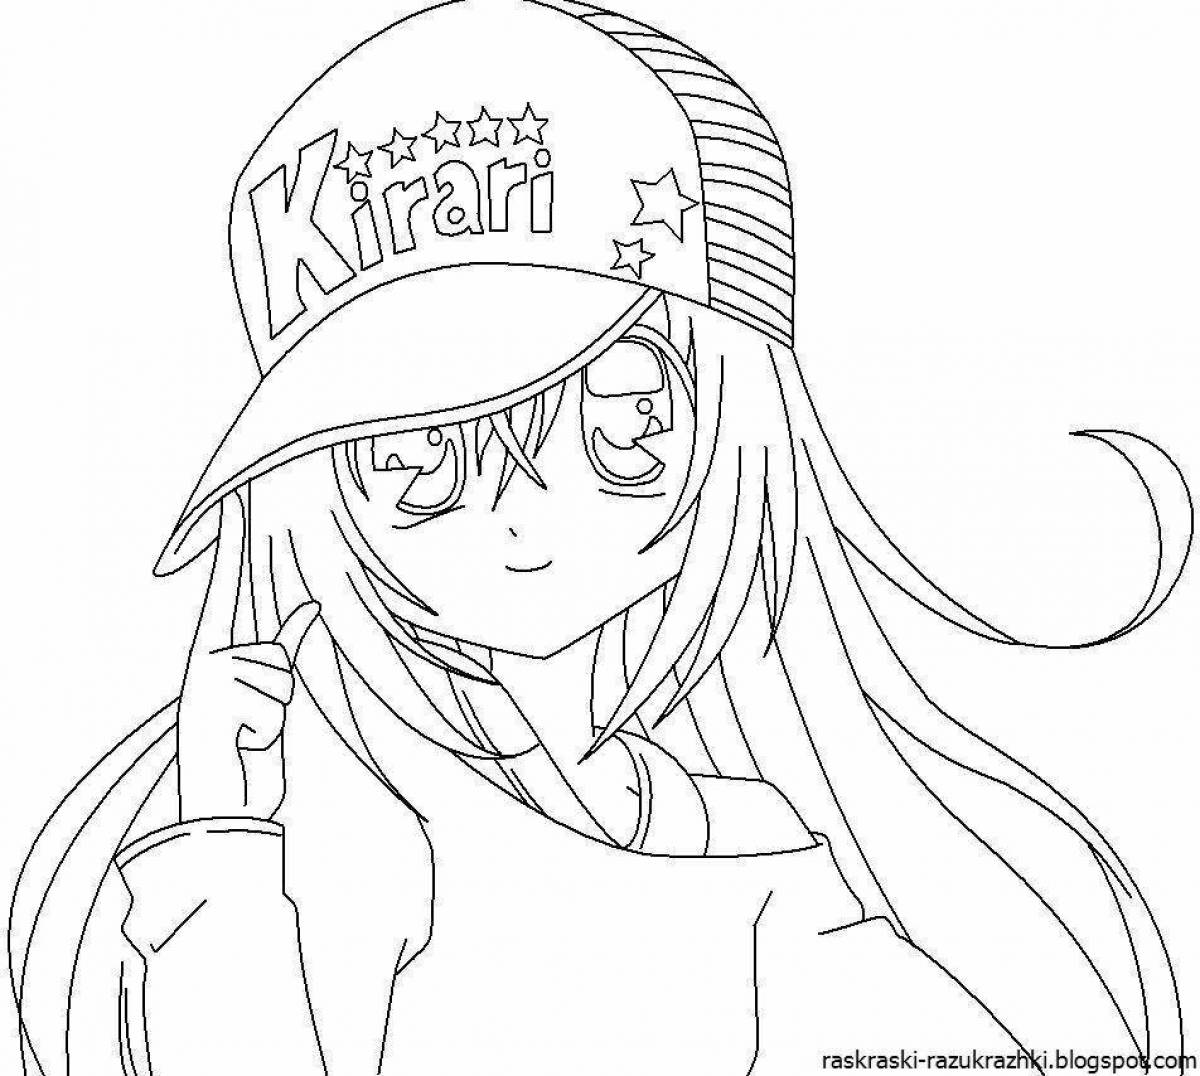 Adorable 11 year old anime girls coloring page